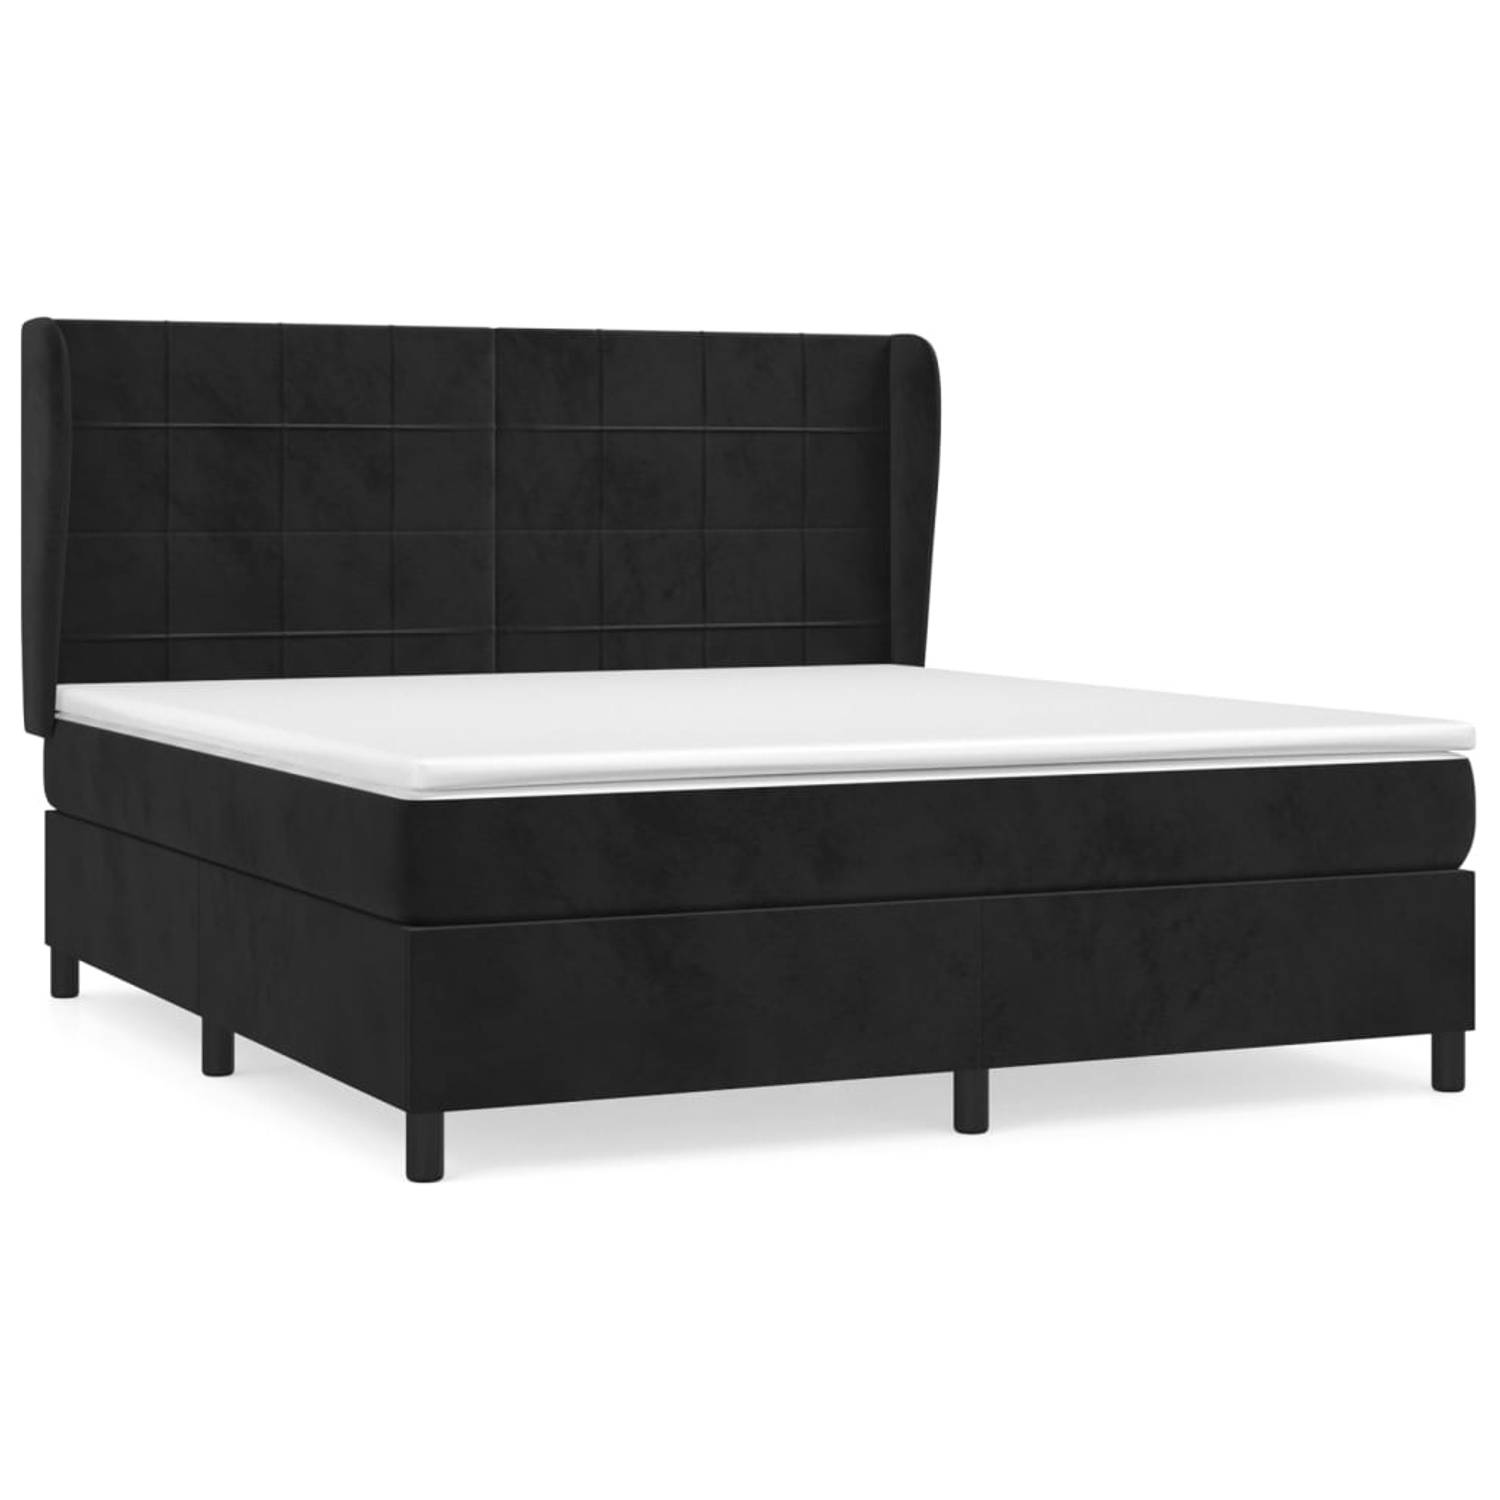 The Living Store Boxspringbed - Luxe - Zwart - 203x183x118/128 cm - Fluweel